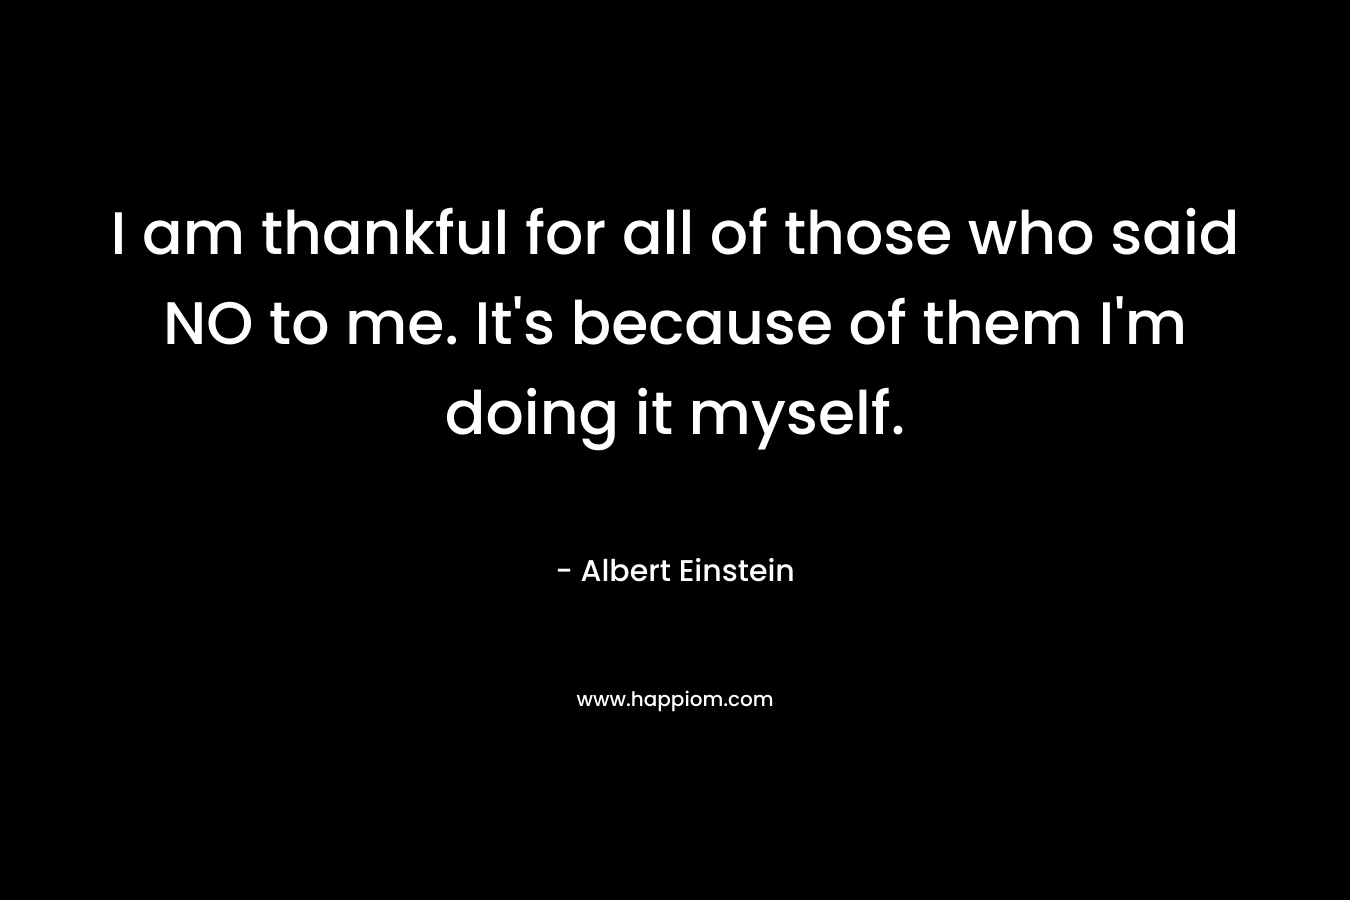 I am thankful for all of those who said NO to me. It’s because of them I’m doing it myself. – Albert Einstein